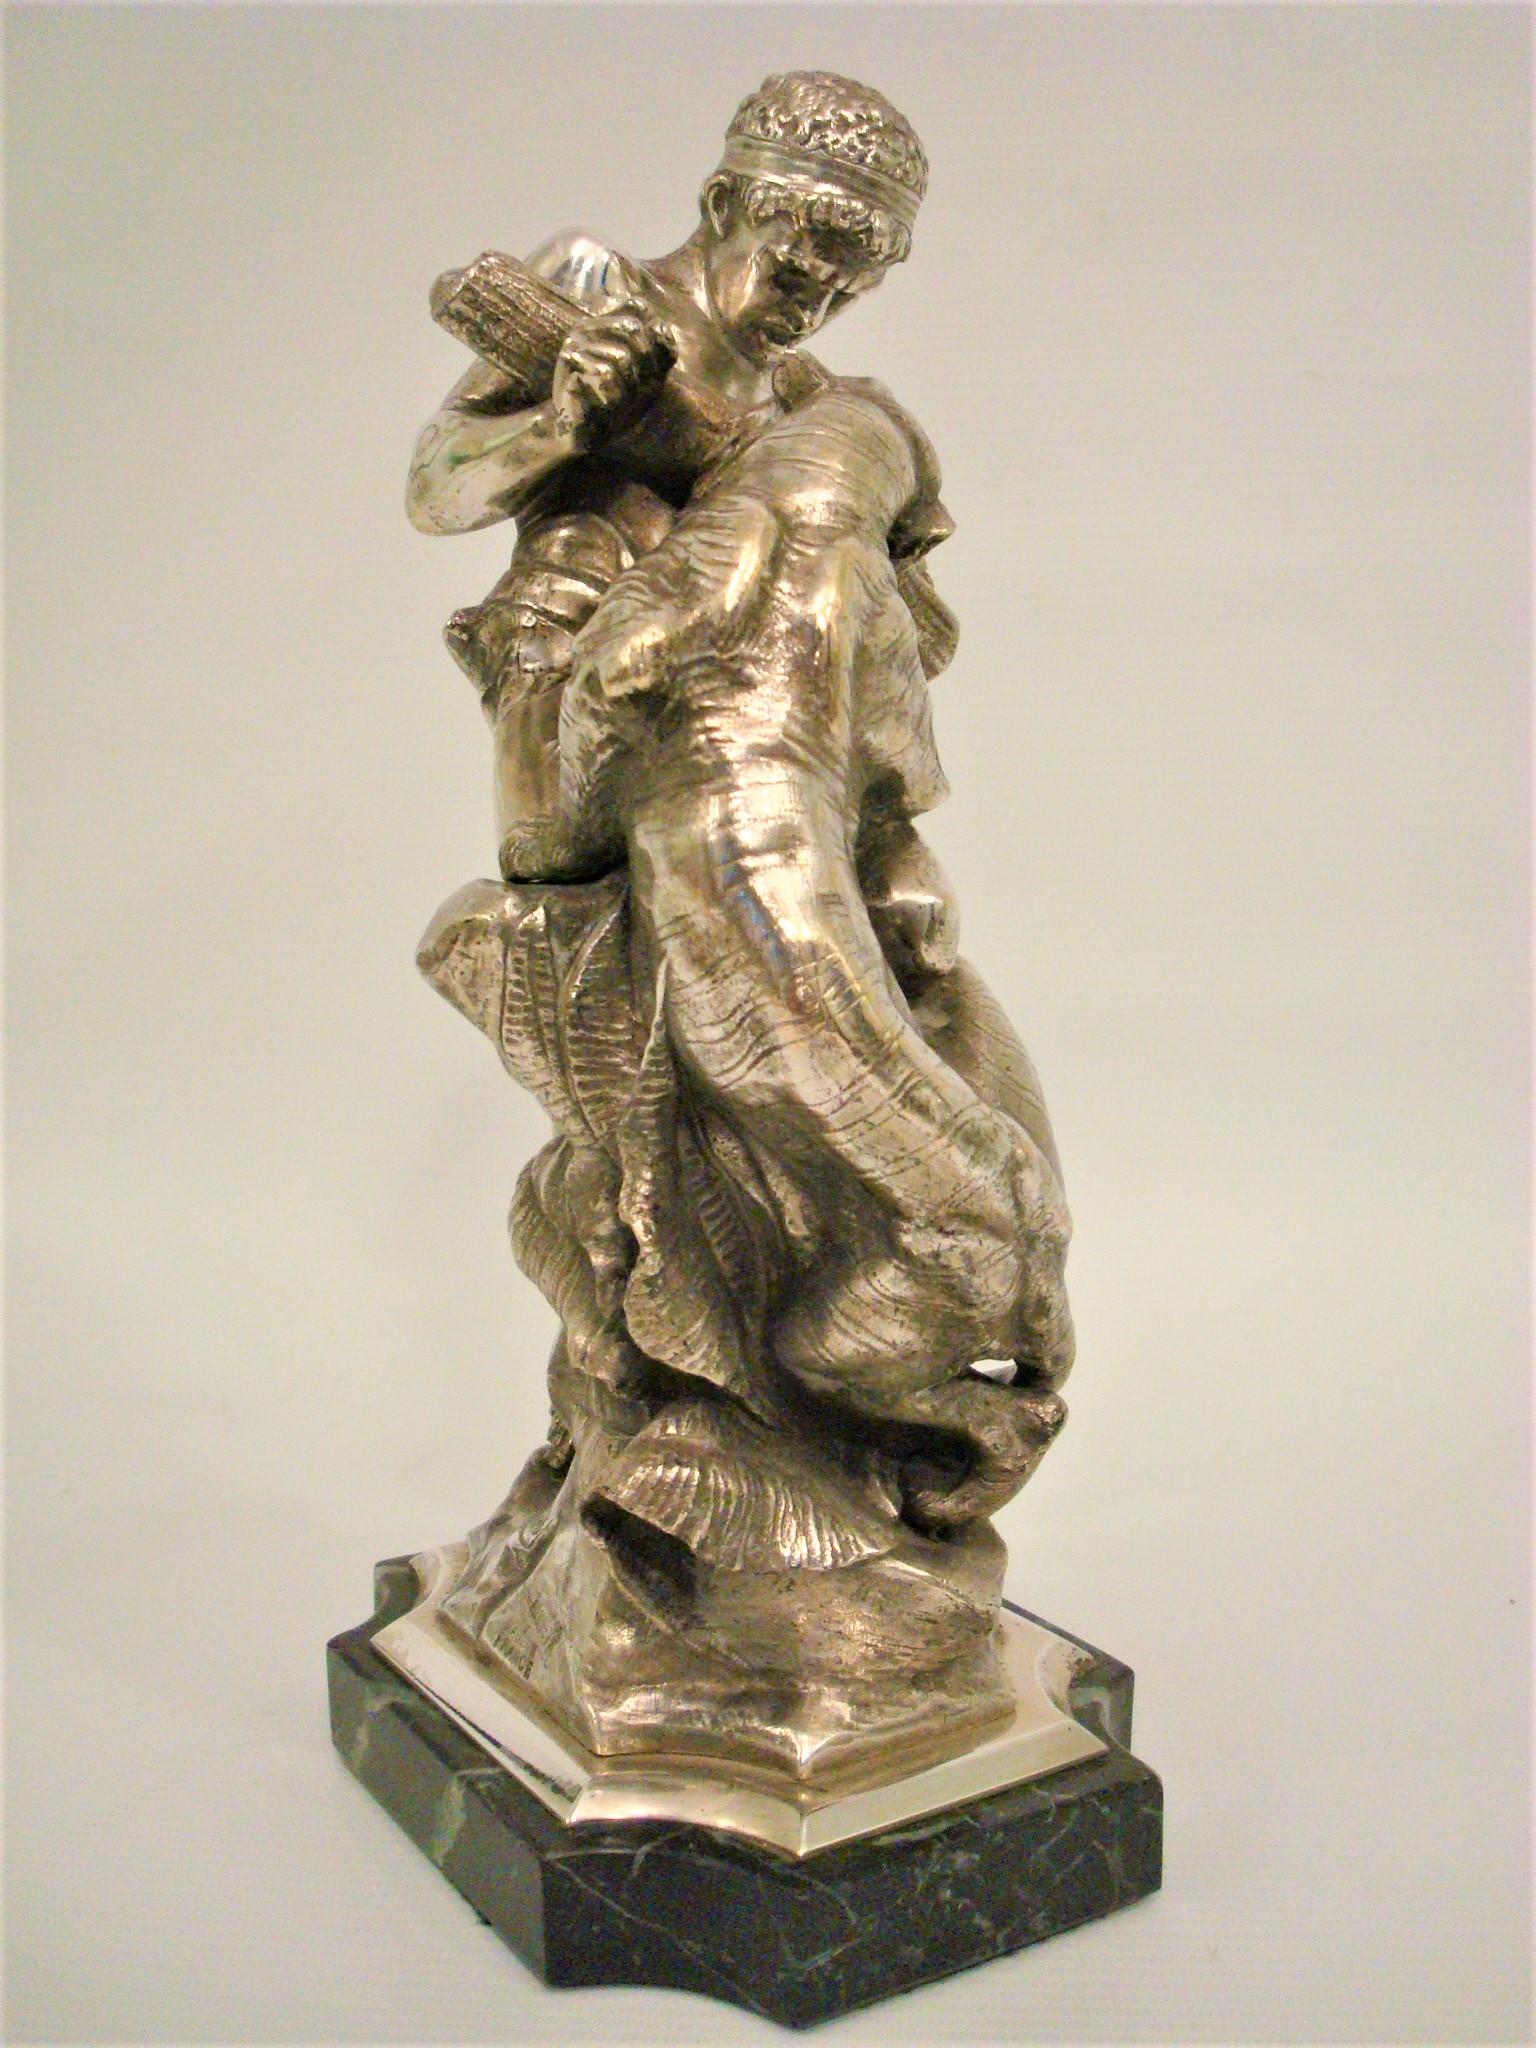 19th Century, Silvered Bronze Sculpture with the Struggle for Life by E. Drouot For Sale 3